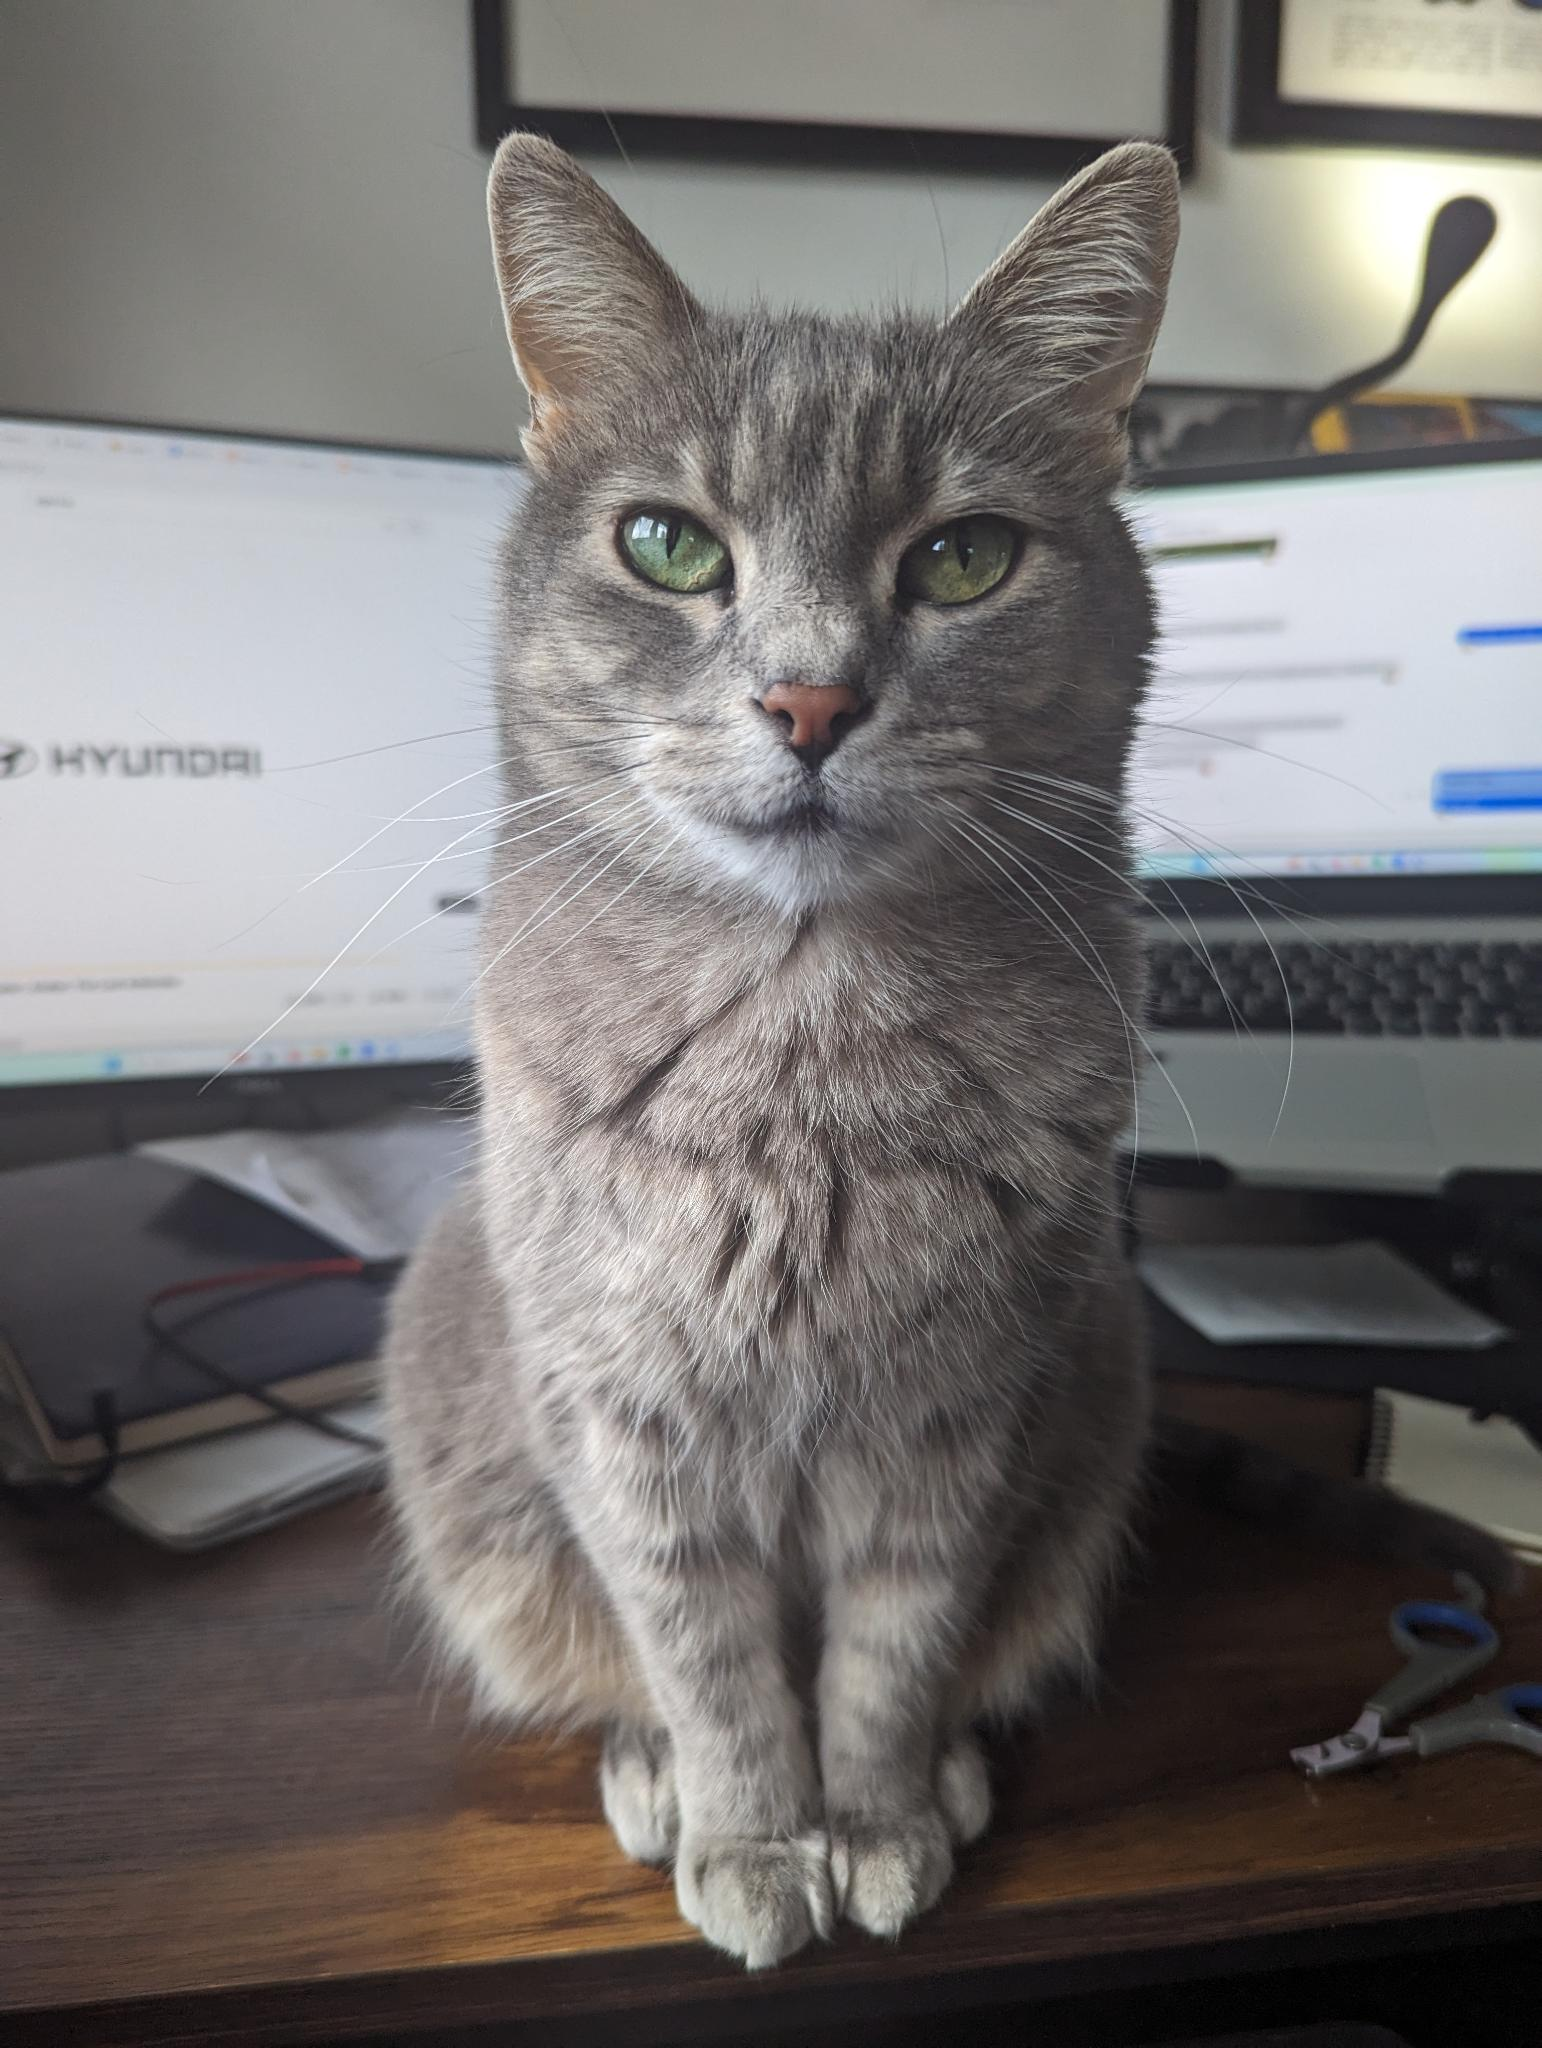 Masha, a gray cat, sitting on a desk in front of a computer.